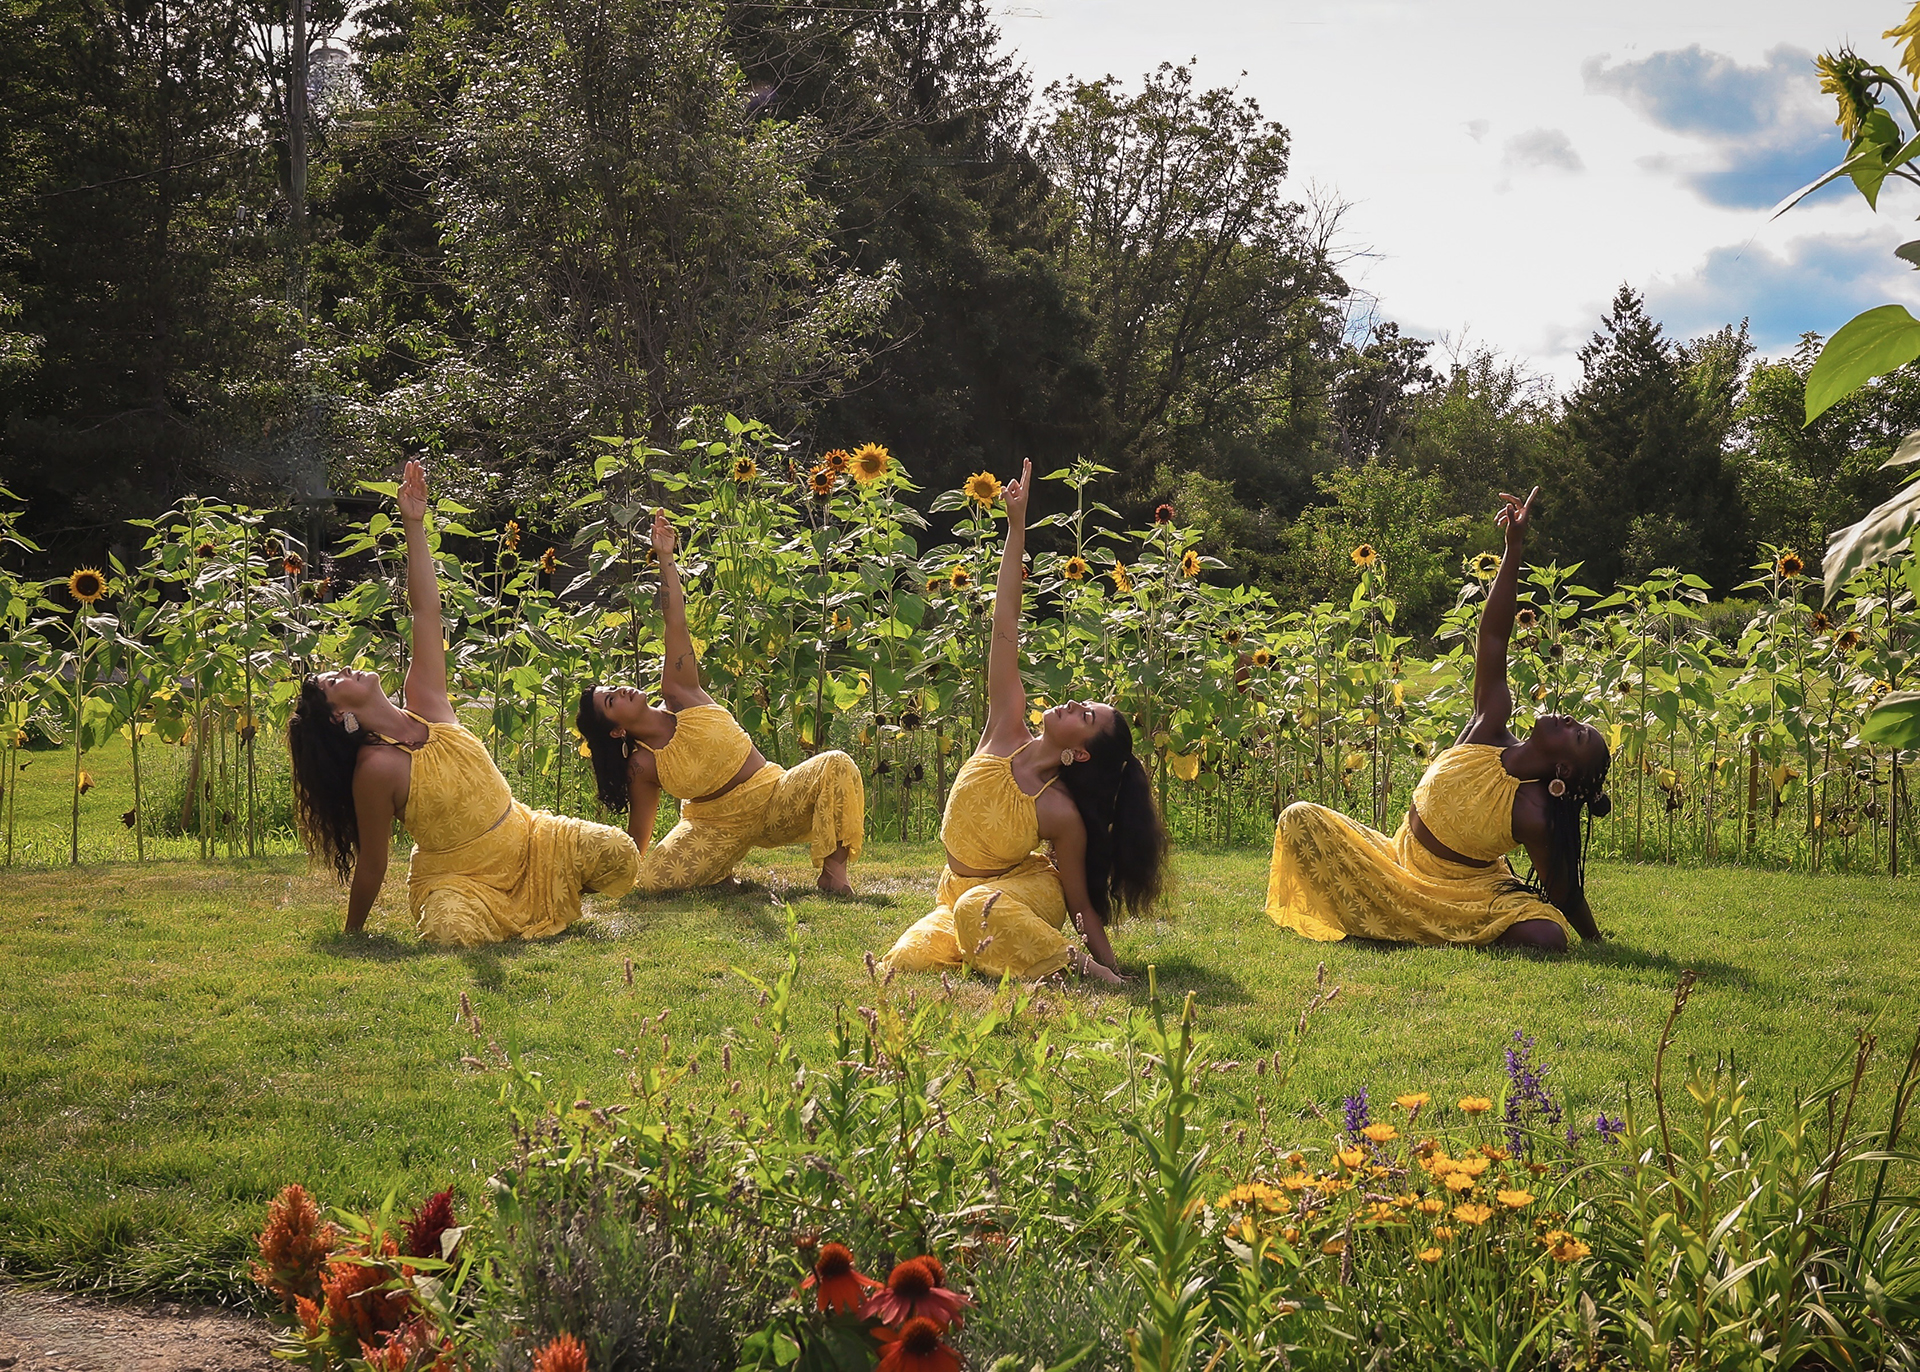 indigenous dancers dressed in yellow perform in front of sunflowers